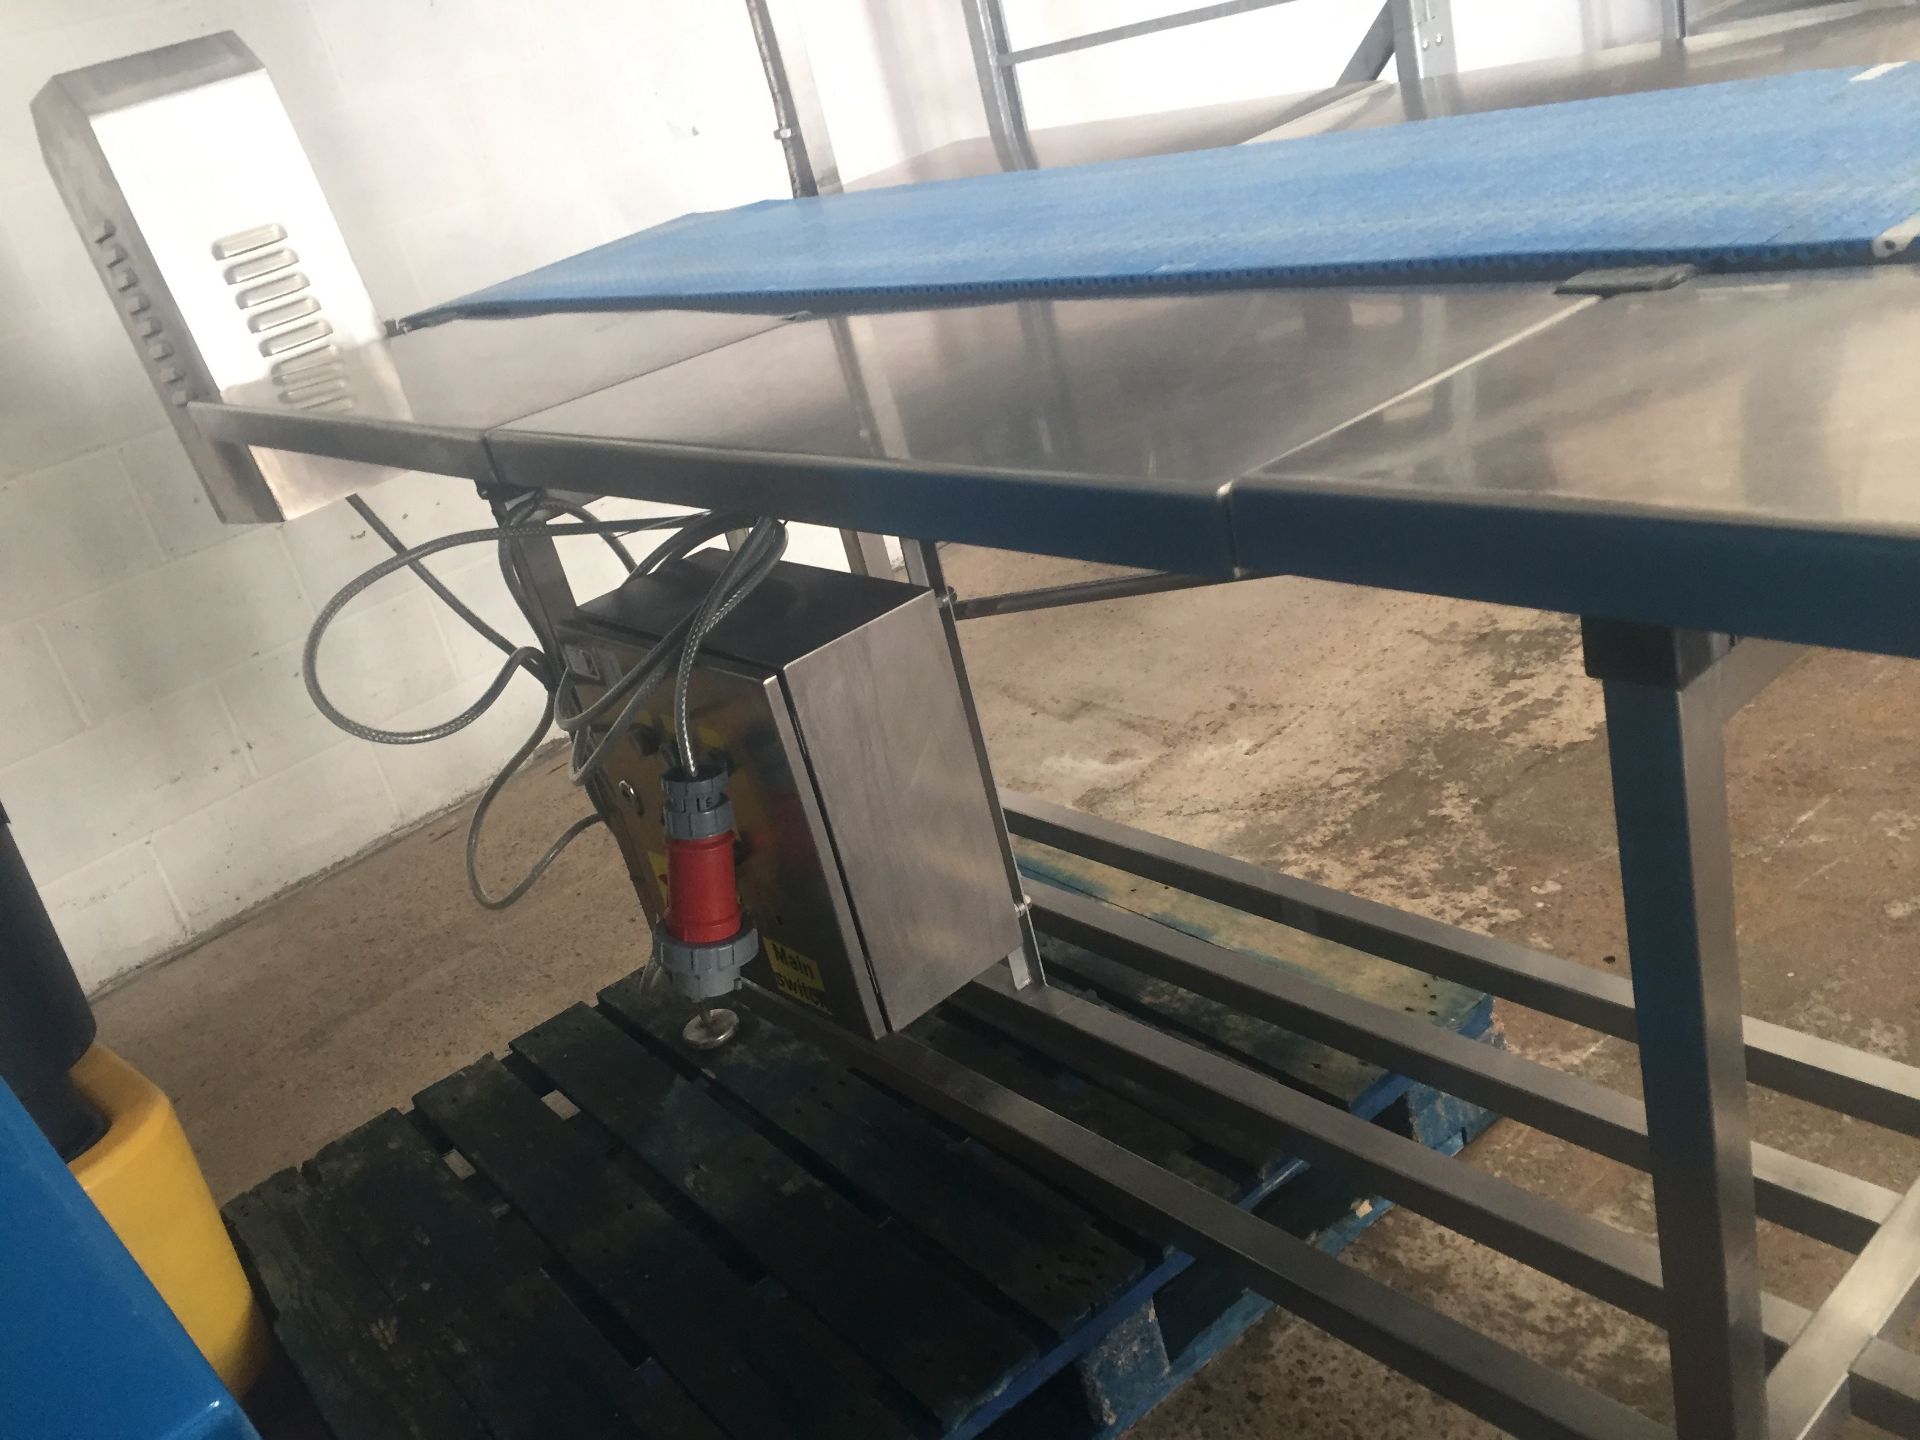 Packing Conveyor with blue introlox 400mm wide belt. 6 work stations each side.Overall length. LO£50 - Image 5 of 6